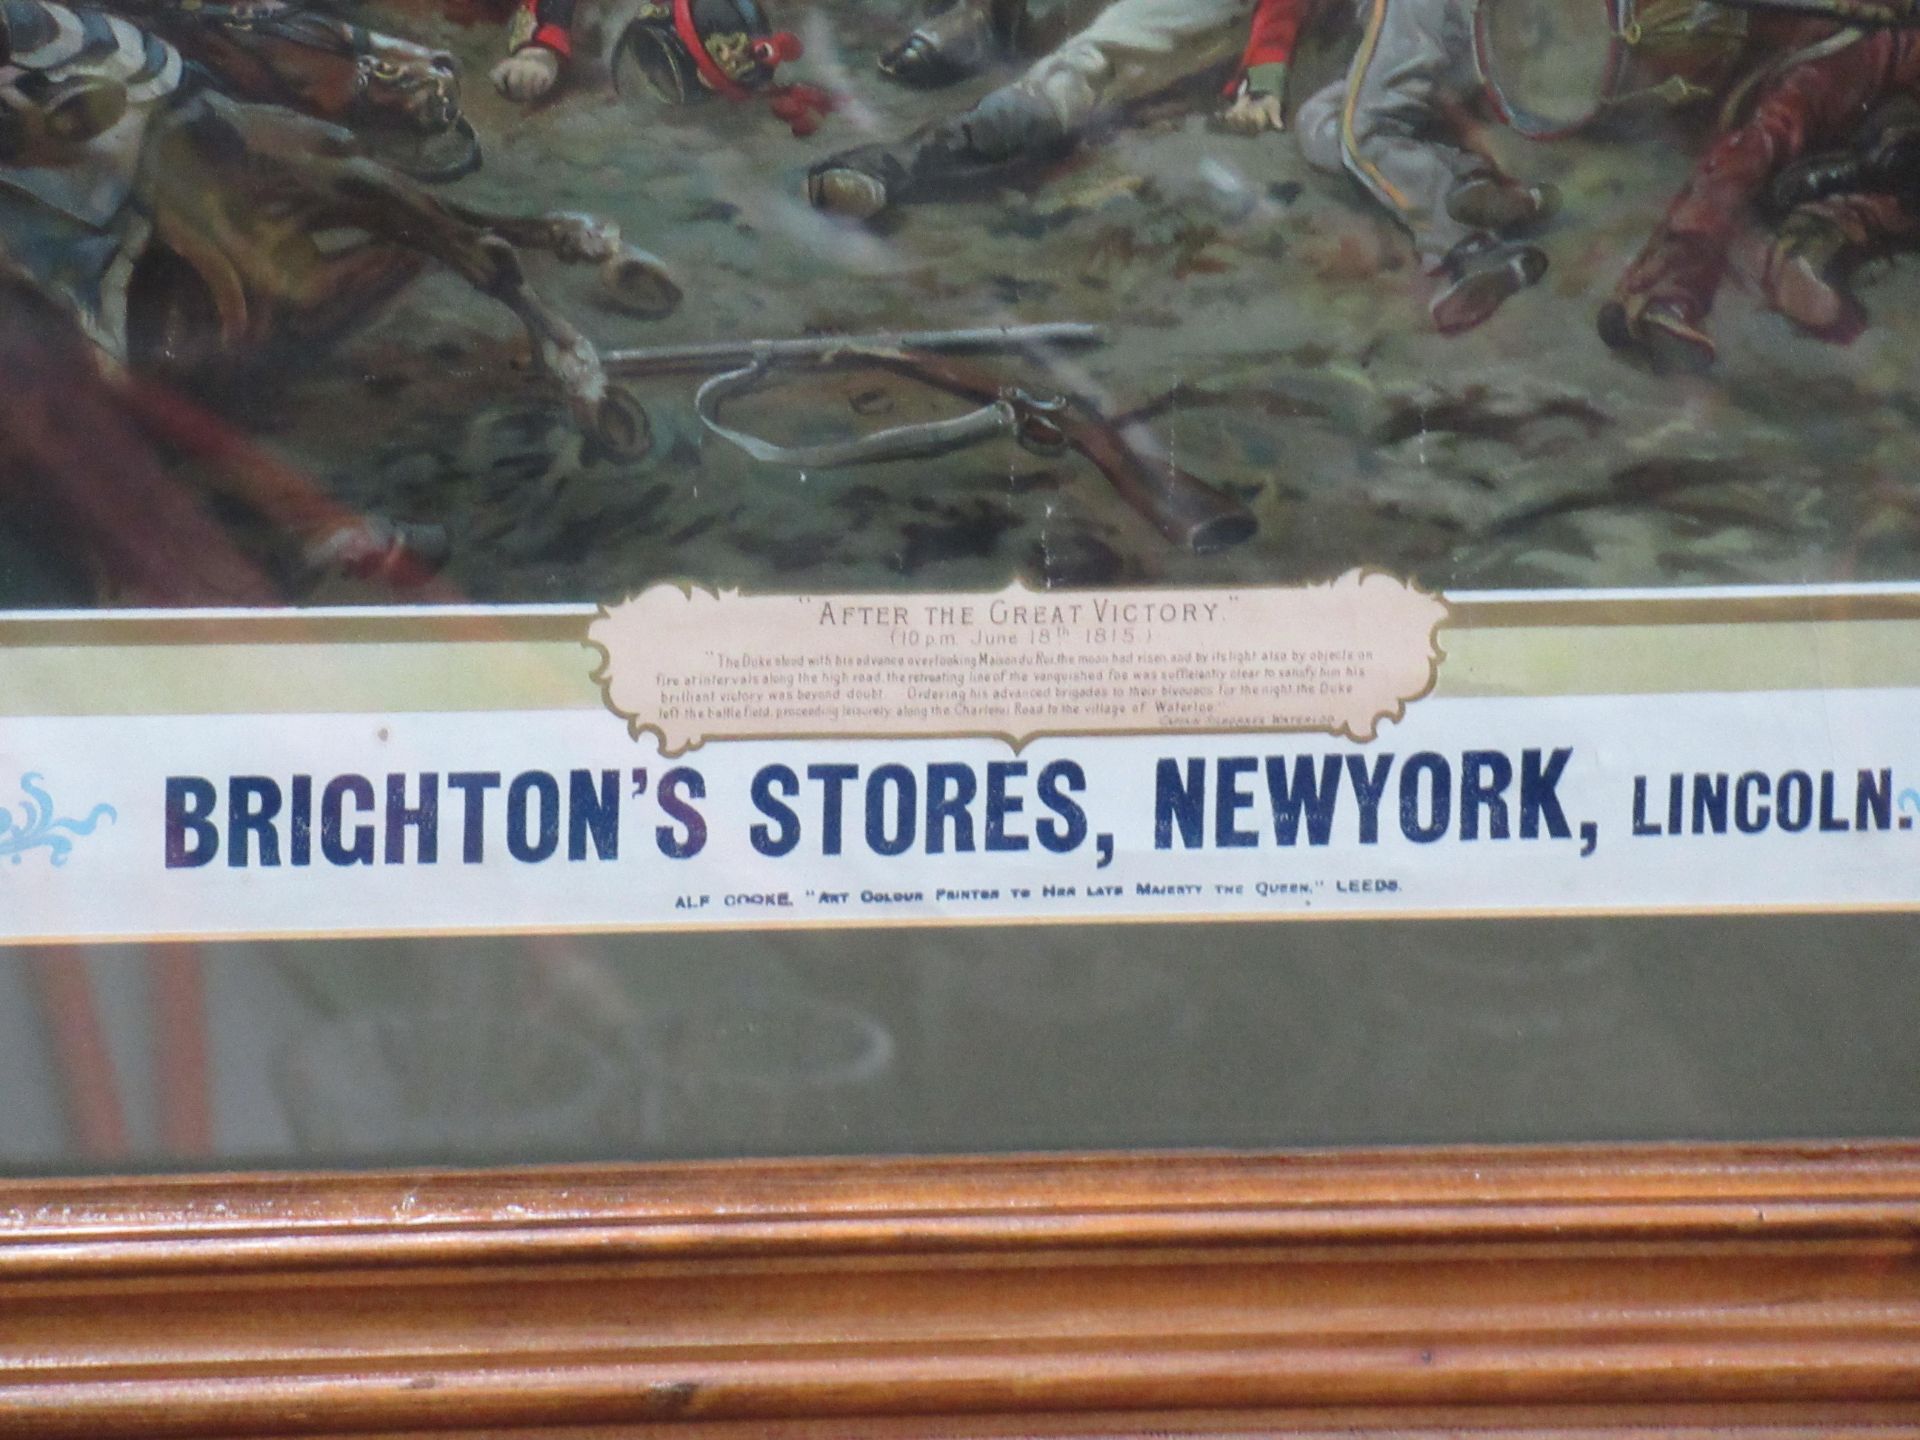 Brighton's Stores, New York, Lincoln 'After The Great Victory- 10pm June 18th 1815' 1903 calendar in - Image 2 of 5